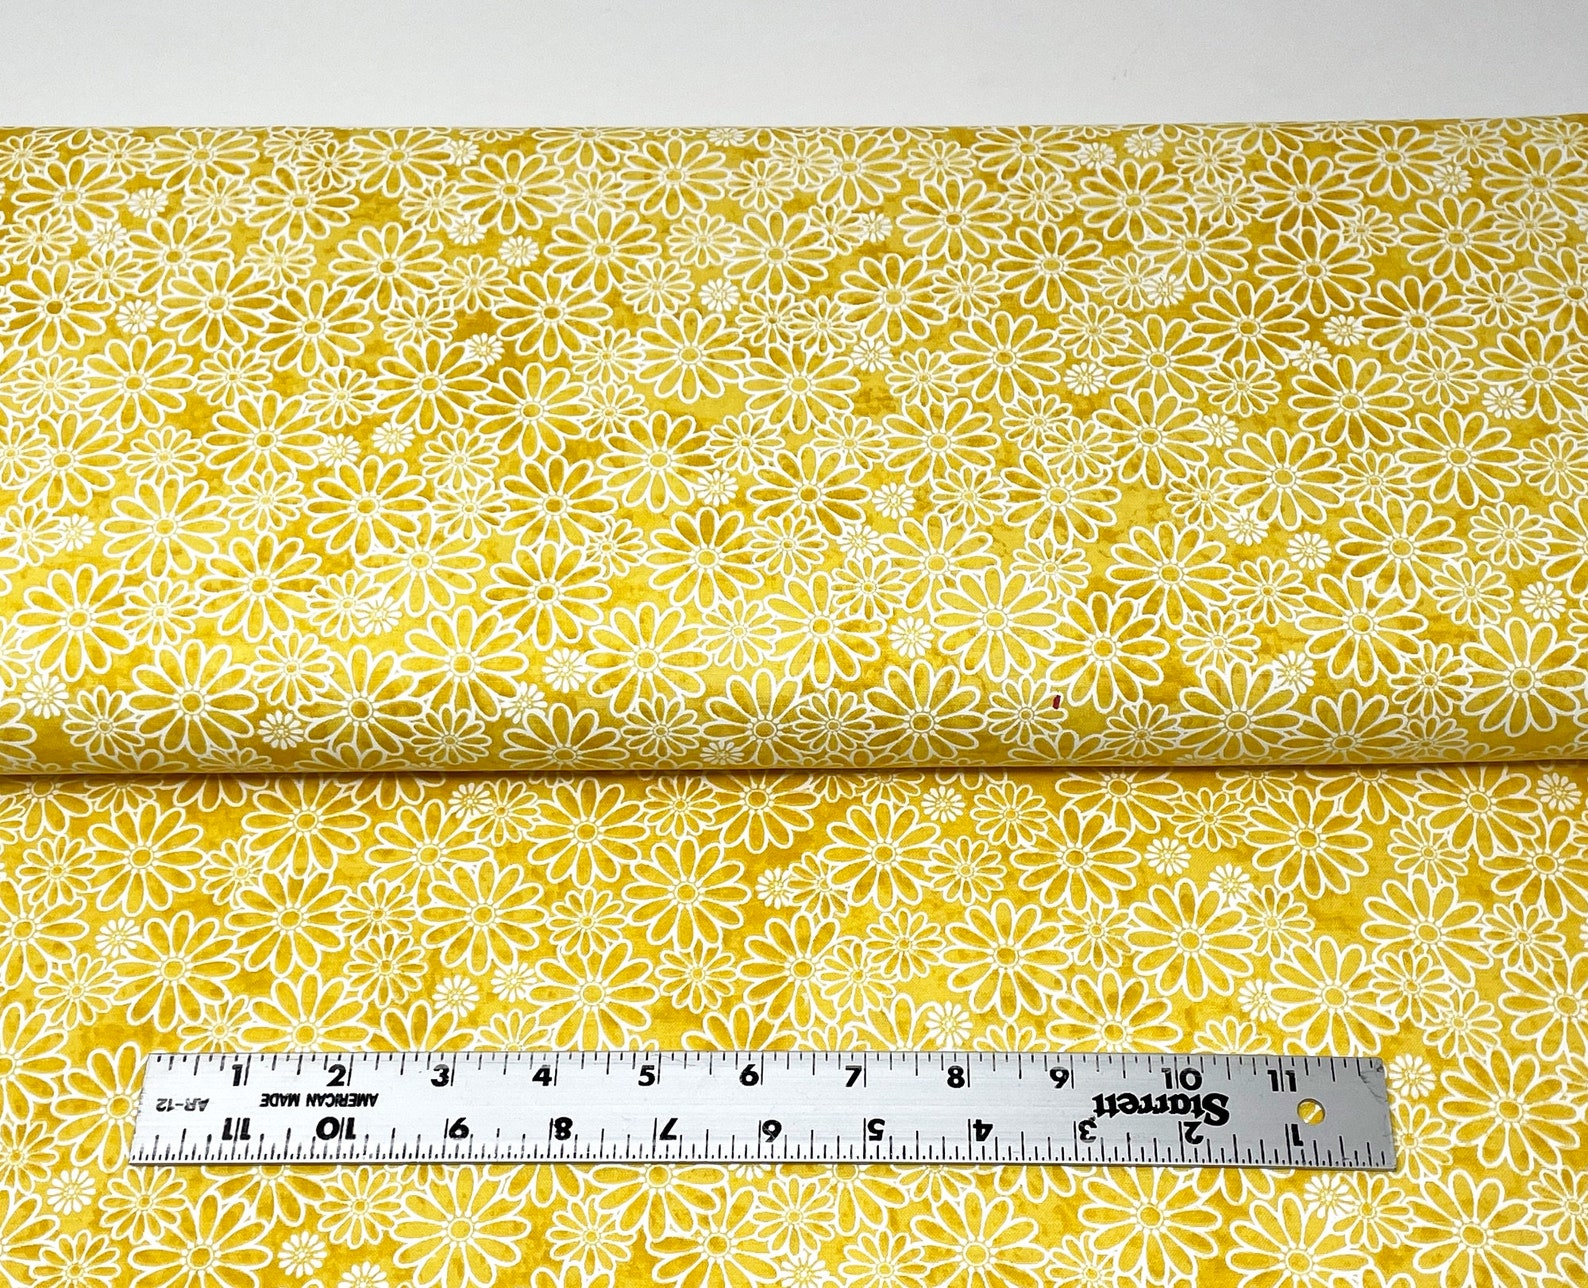 Yellow Daisy Delight Fabric White Flowers Fabric by the | Etsy UK